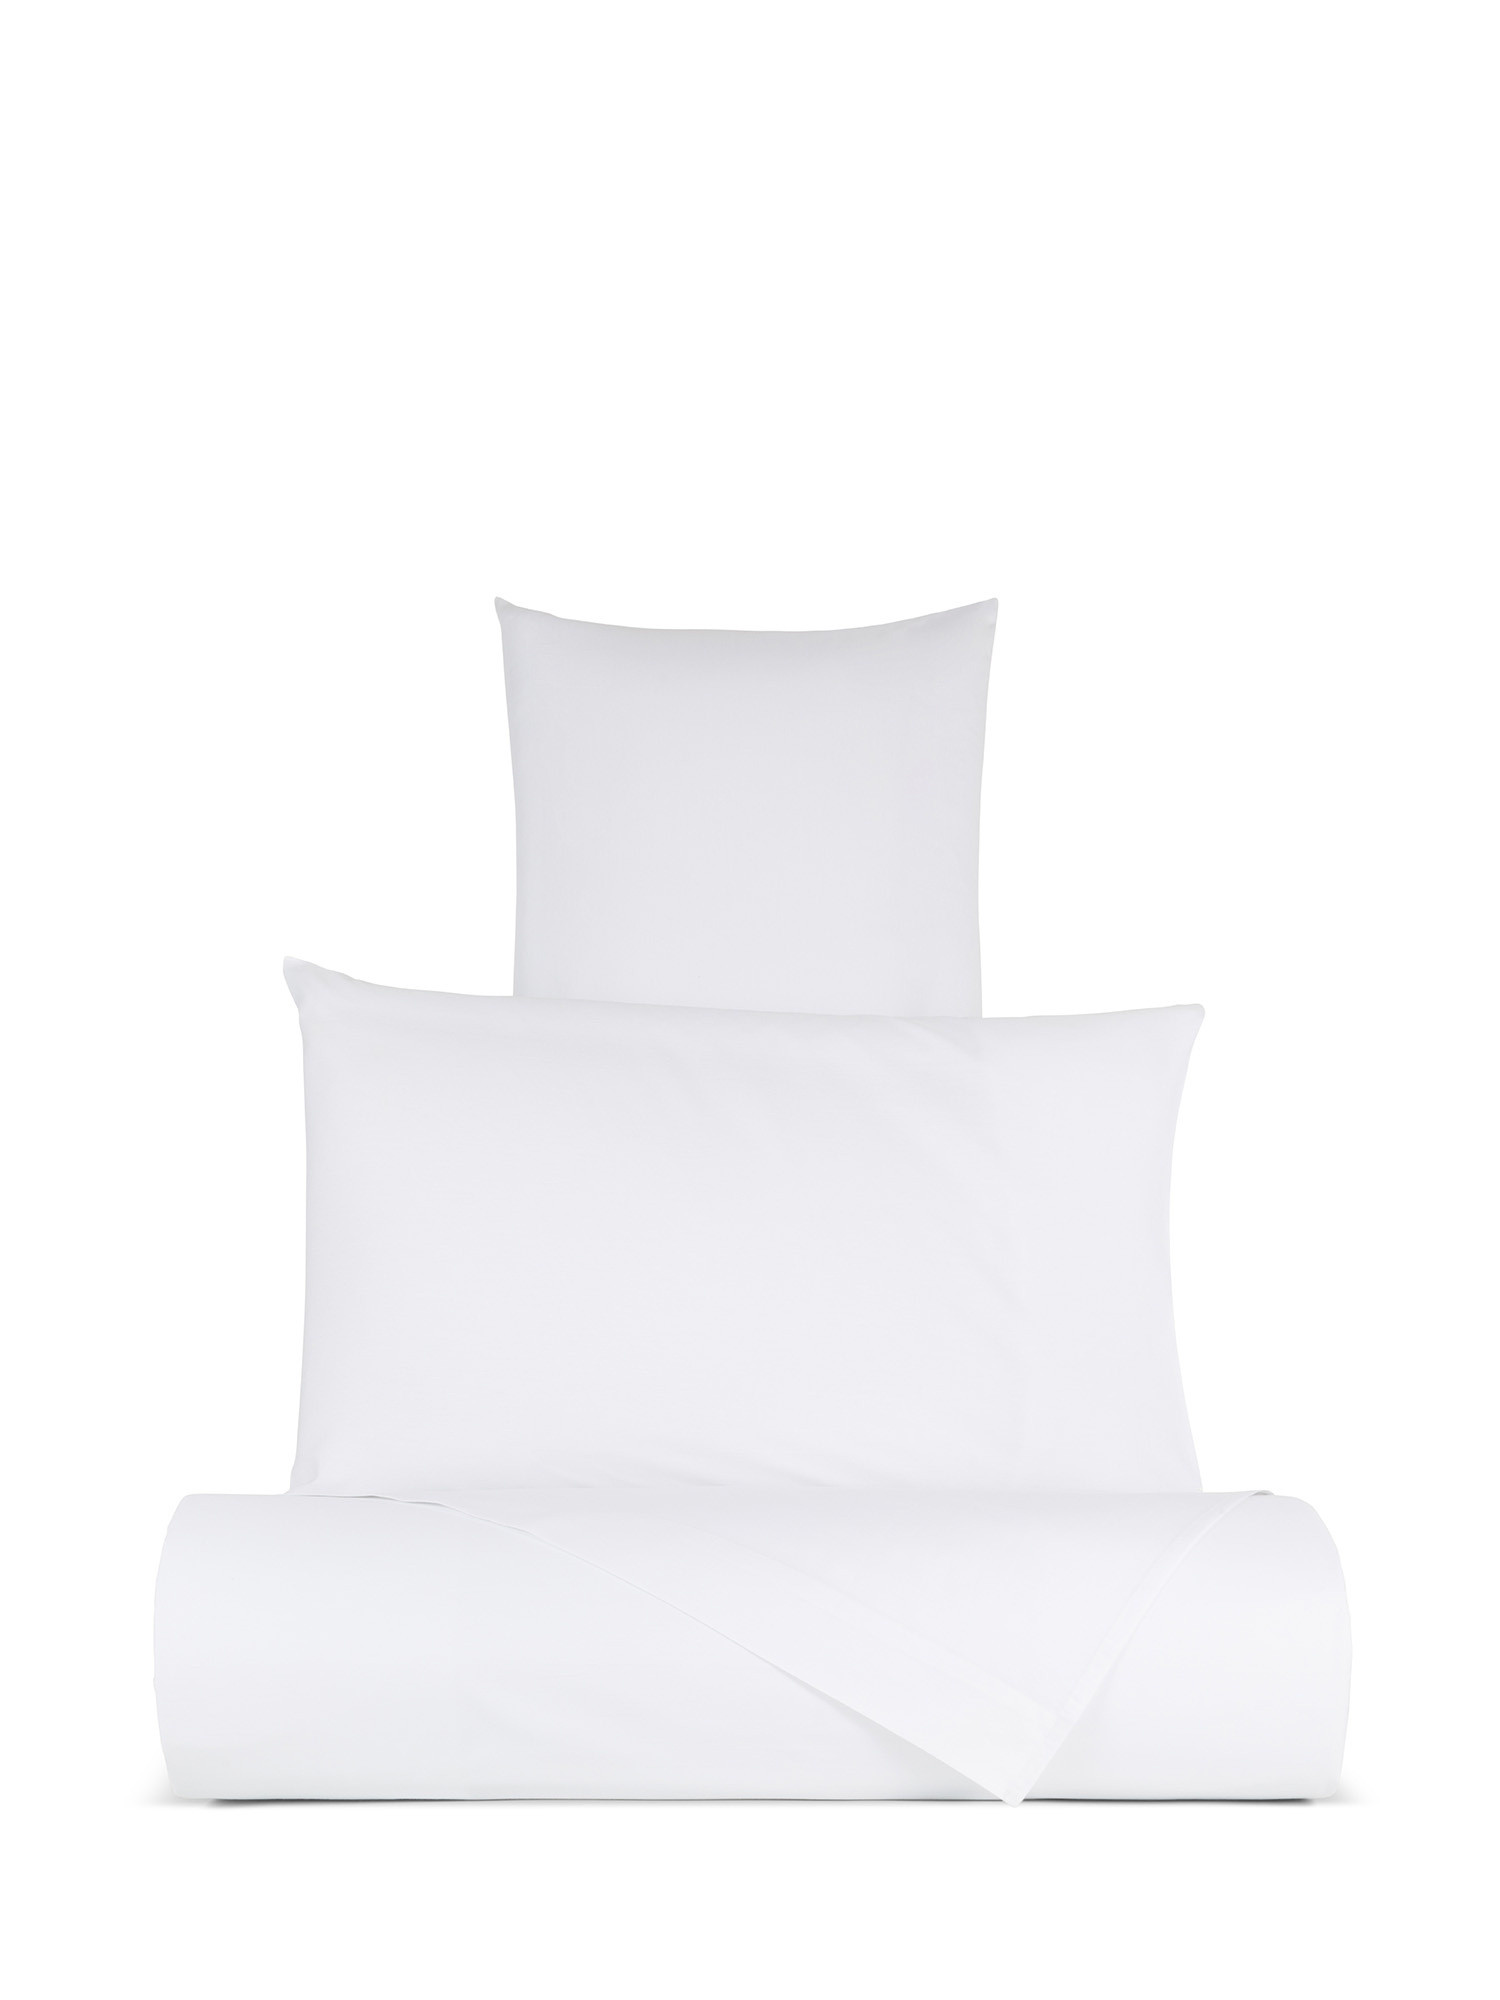 Solid color percale cotton sheet set, White, large image number 0